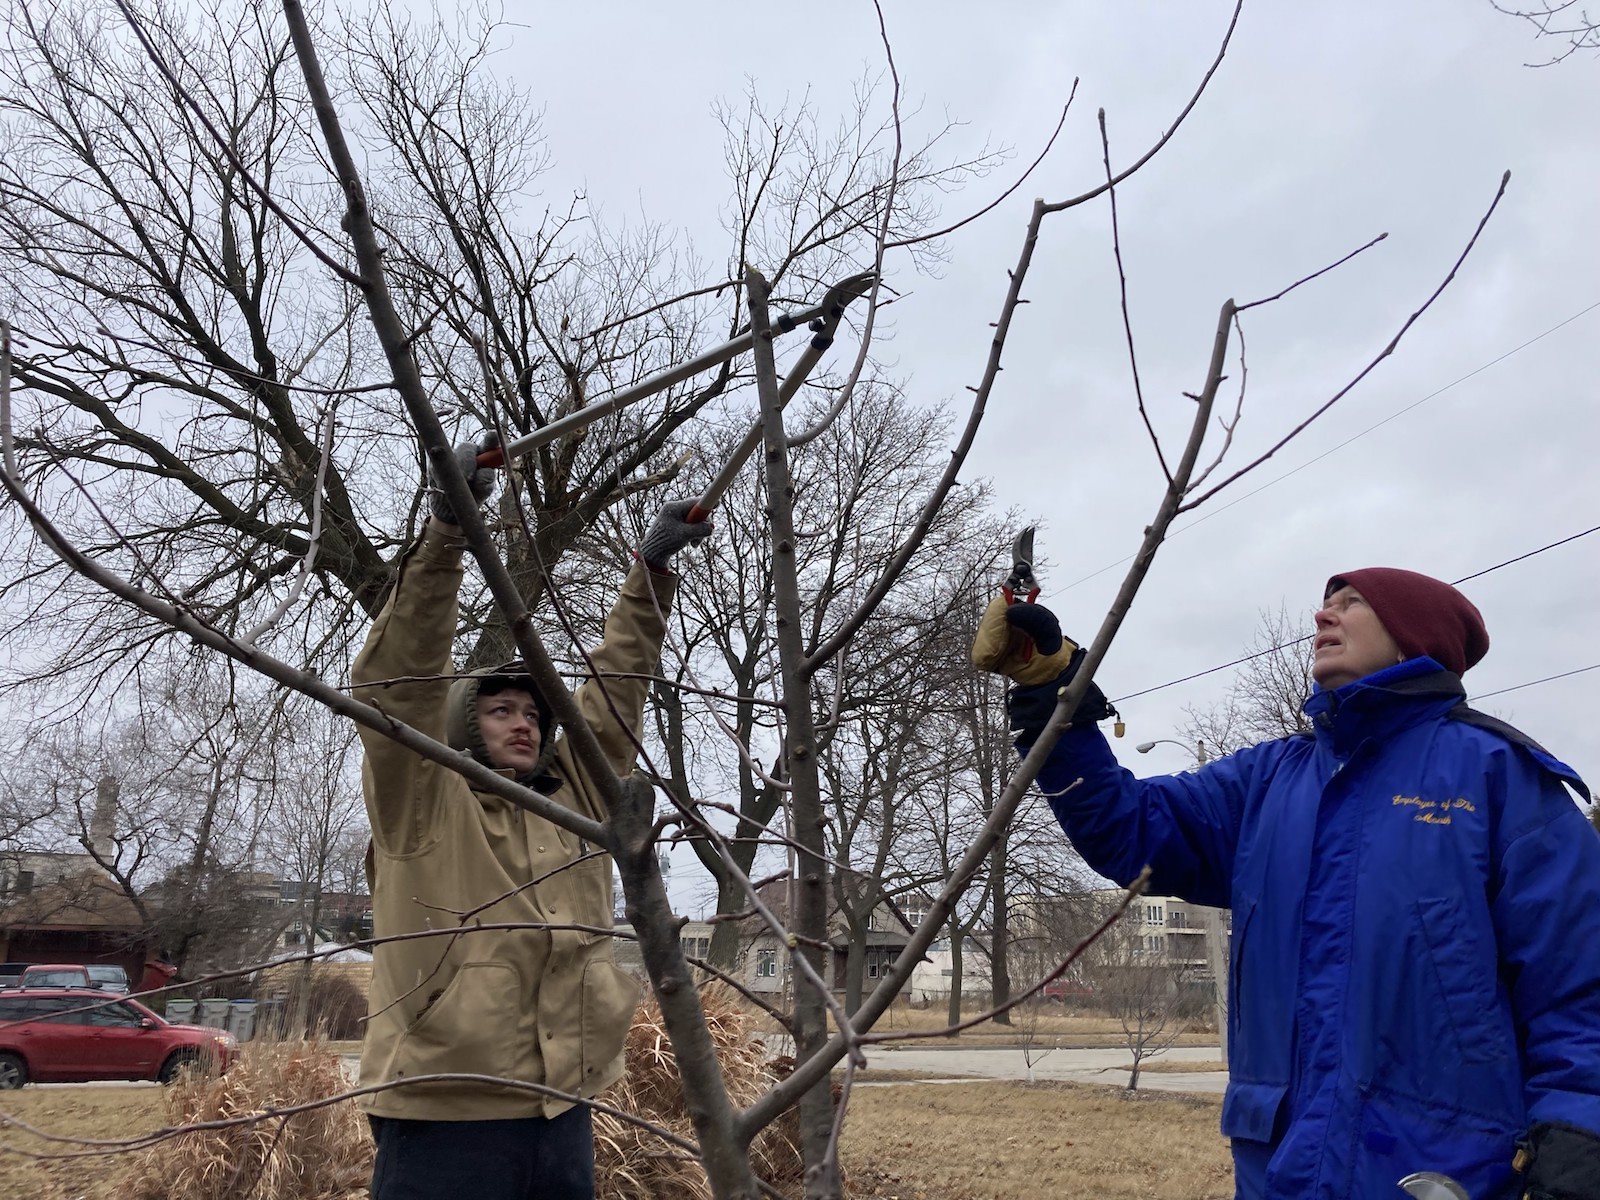 A man in a hoodie and heavy jacket holds a large pair of pruning shears to cut a bare tree branch. A woman dressed in red beanie and blue jacket stands beside him.